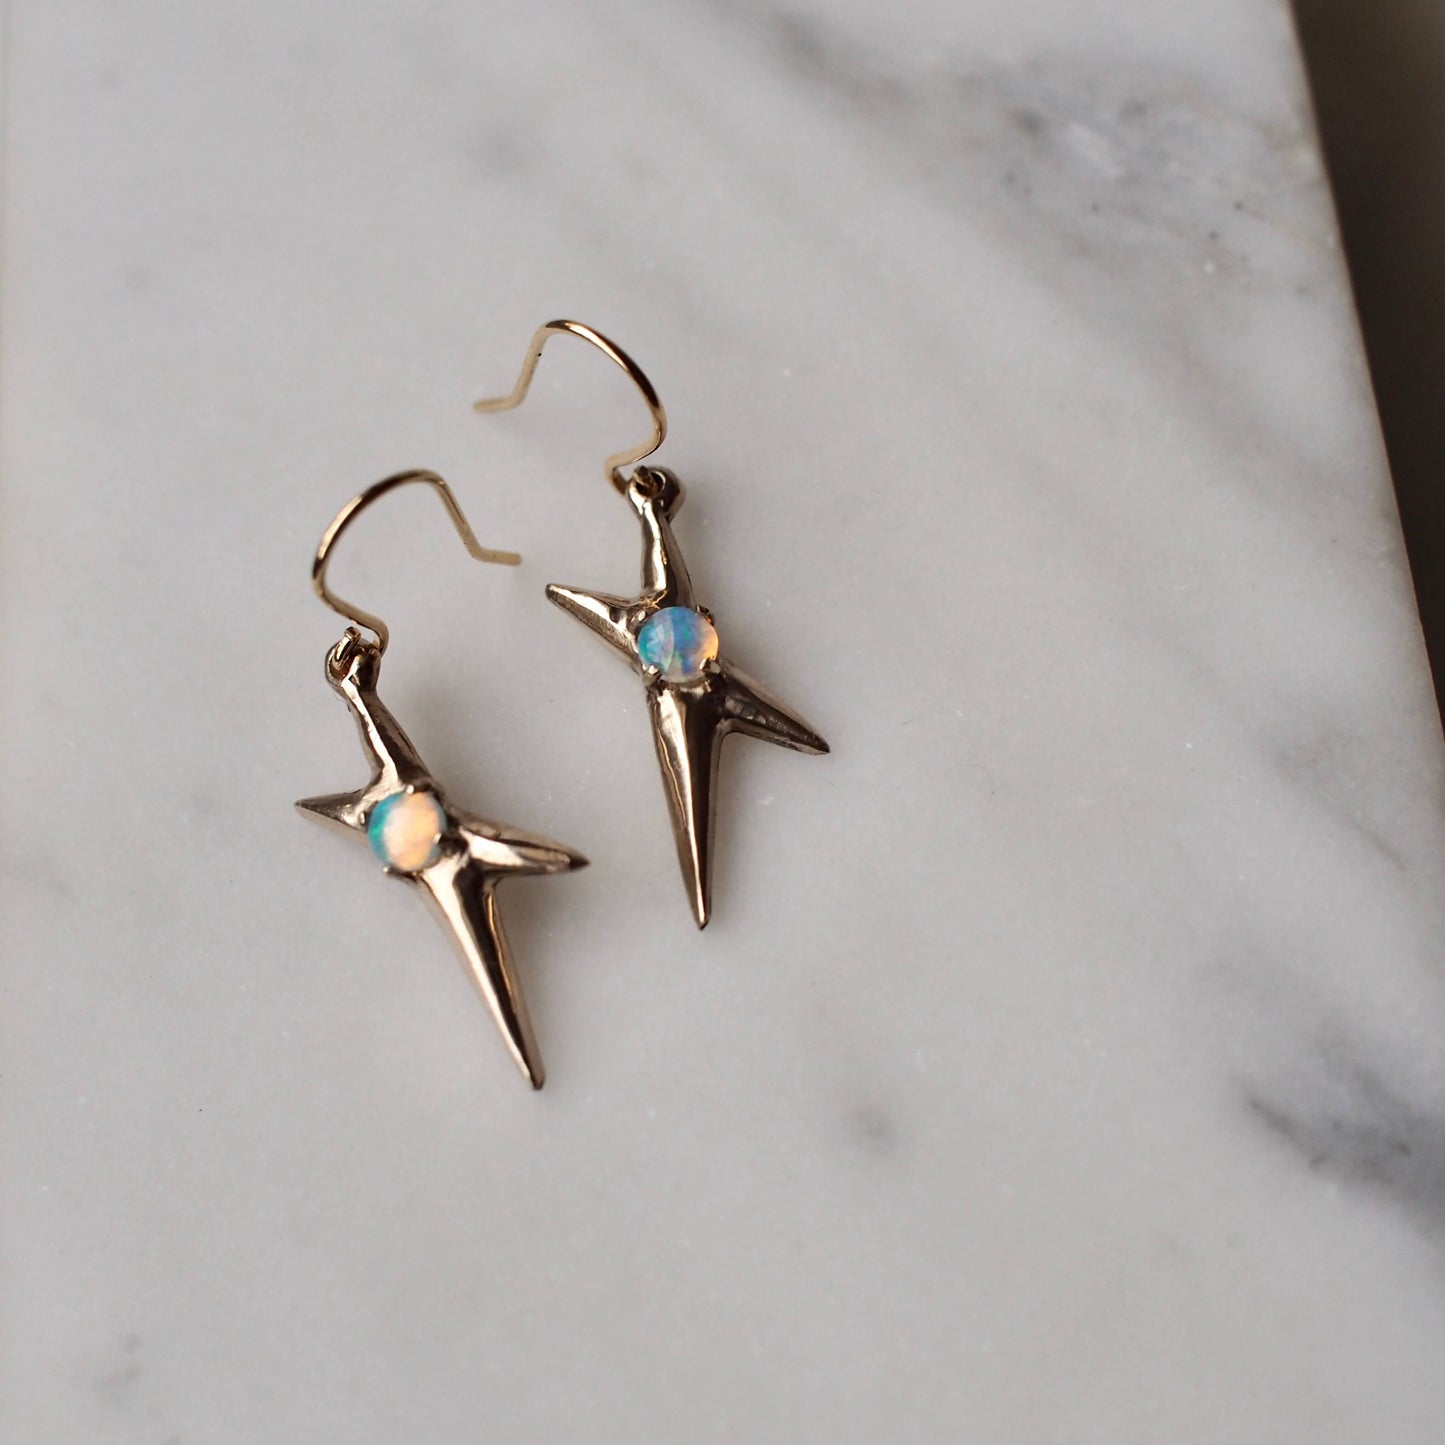 Spikey electric flash earrings set with sustainably sourced opal in gold tone